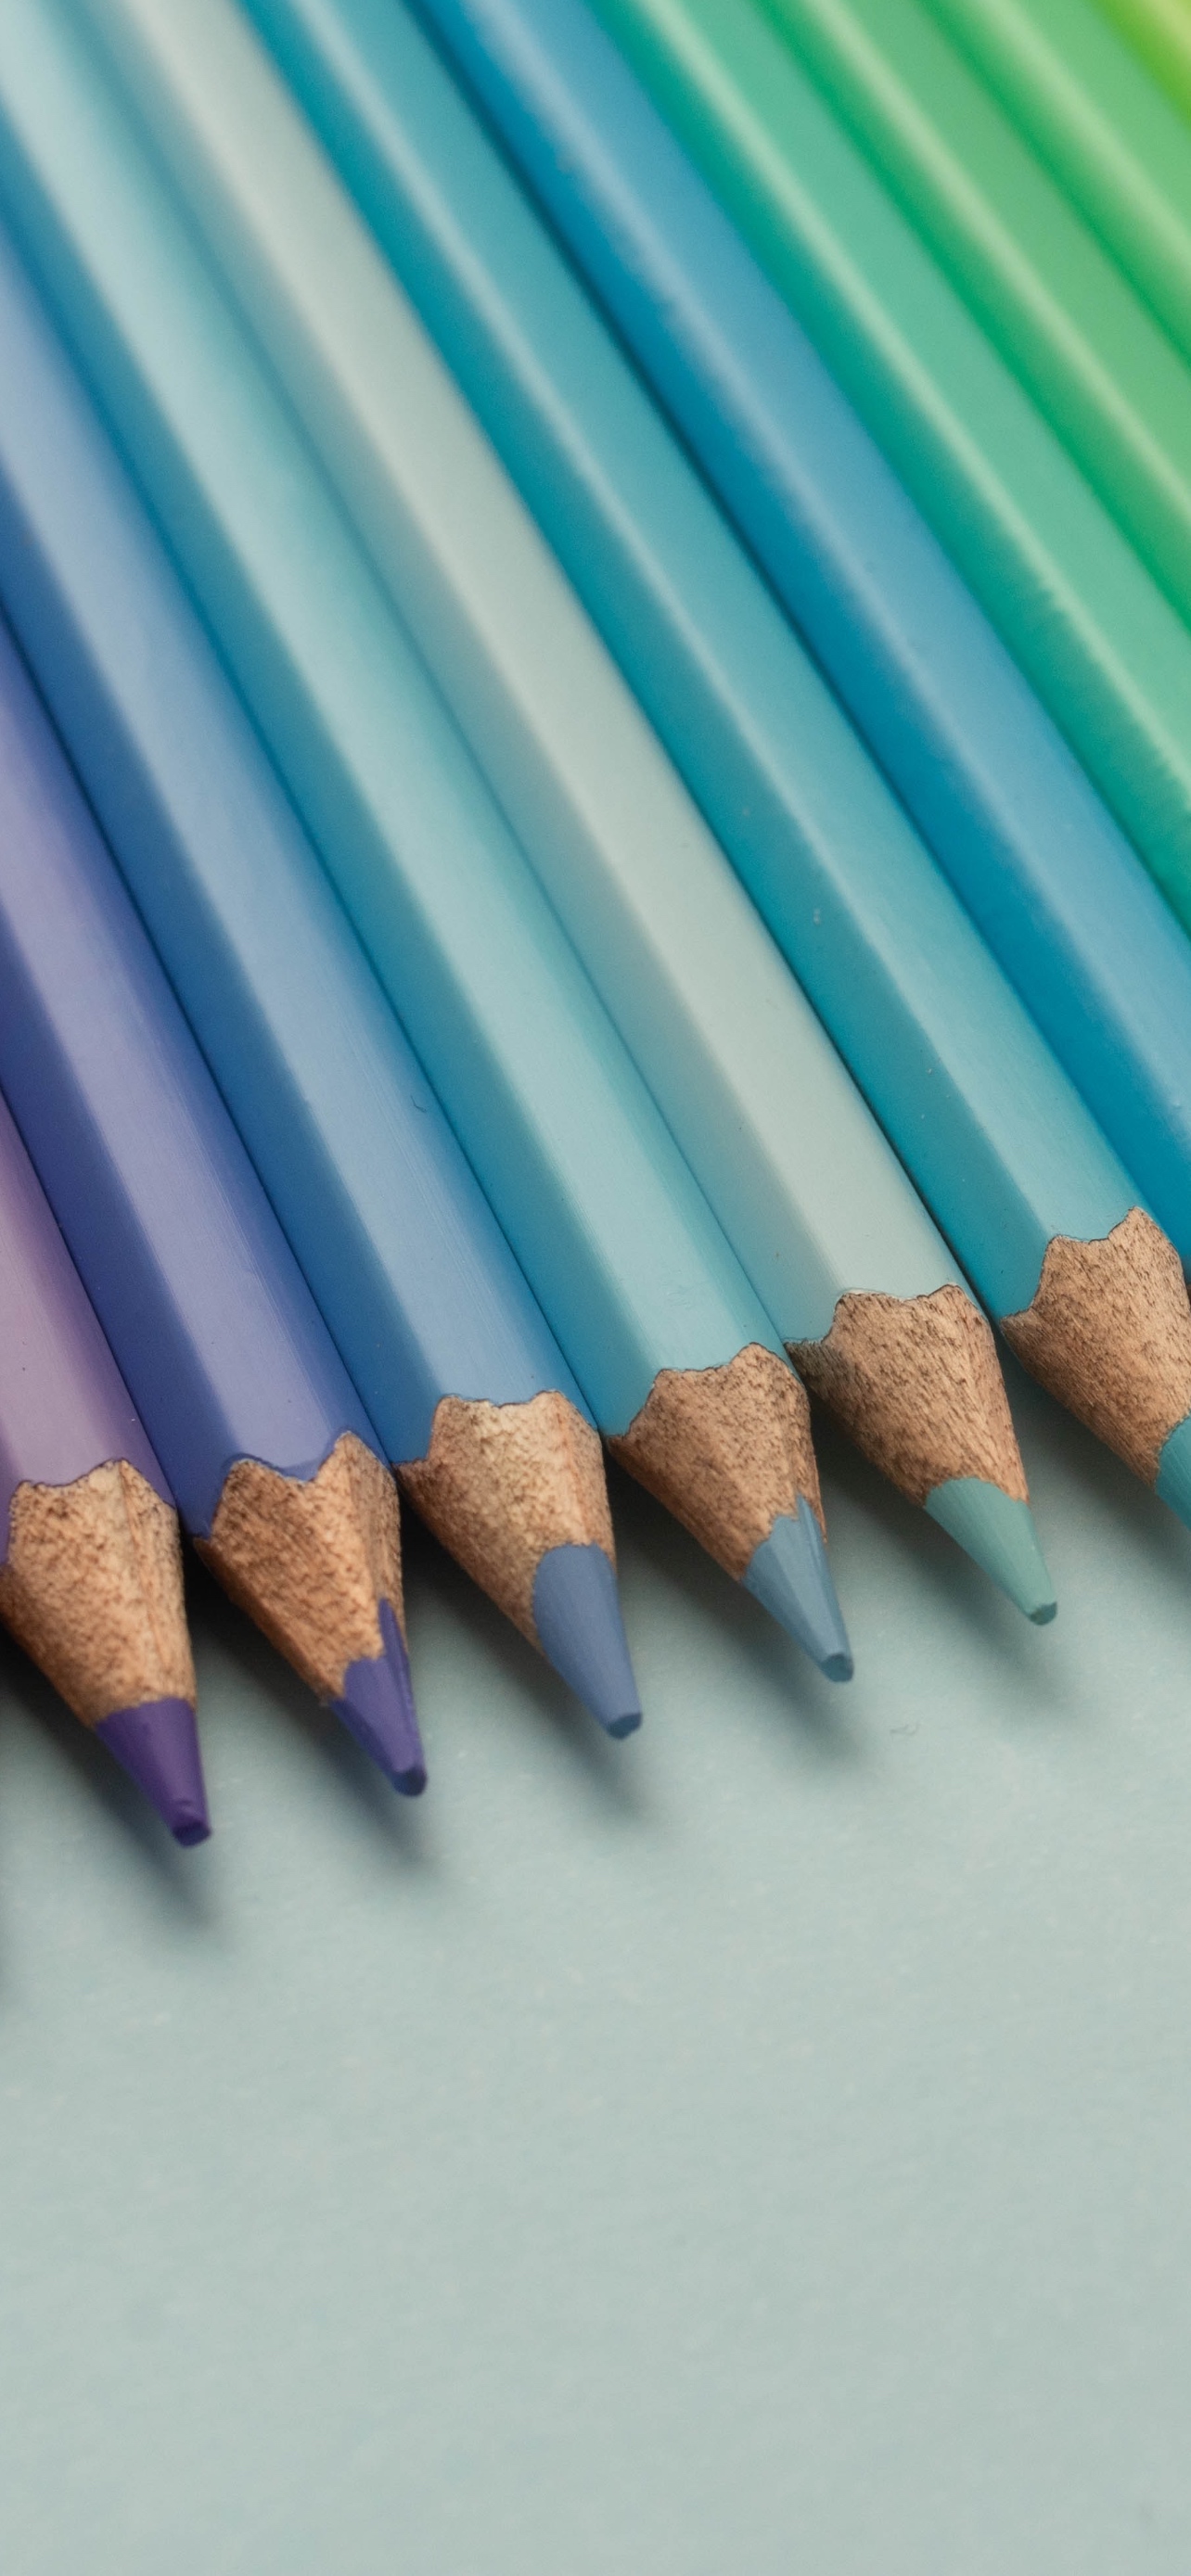 Colorful pencils wallpapers for iPhone pack